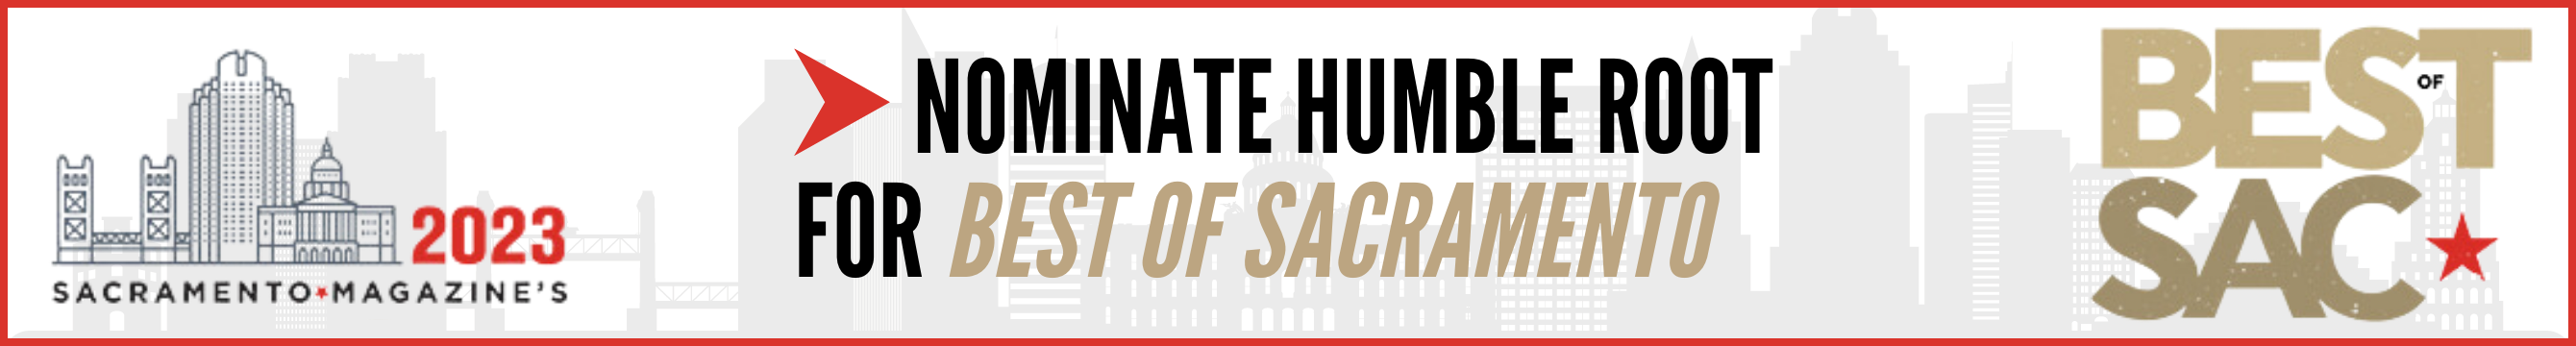 Nominate Humble Root for Best of Sacramento